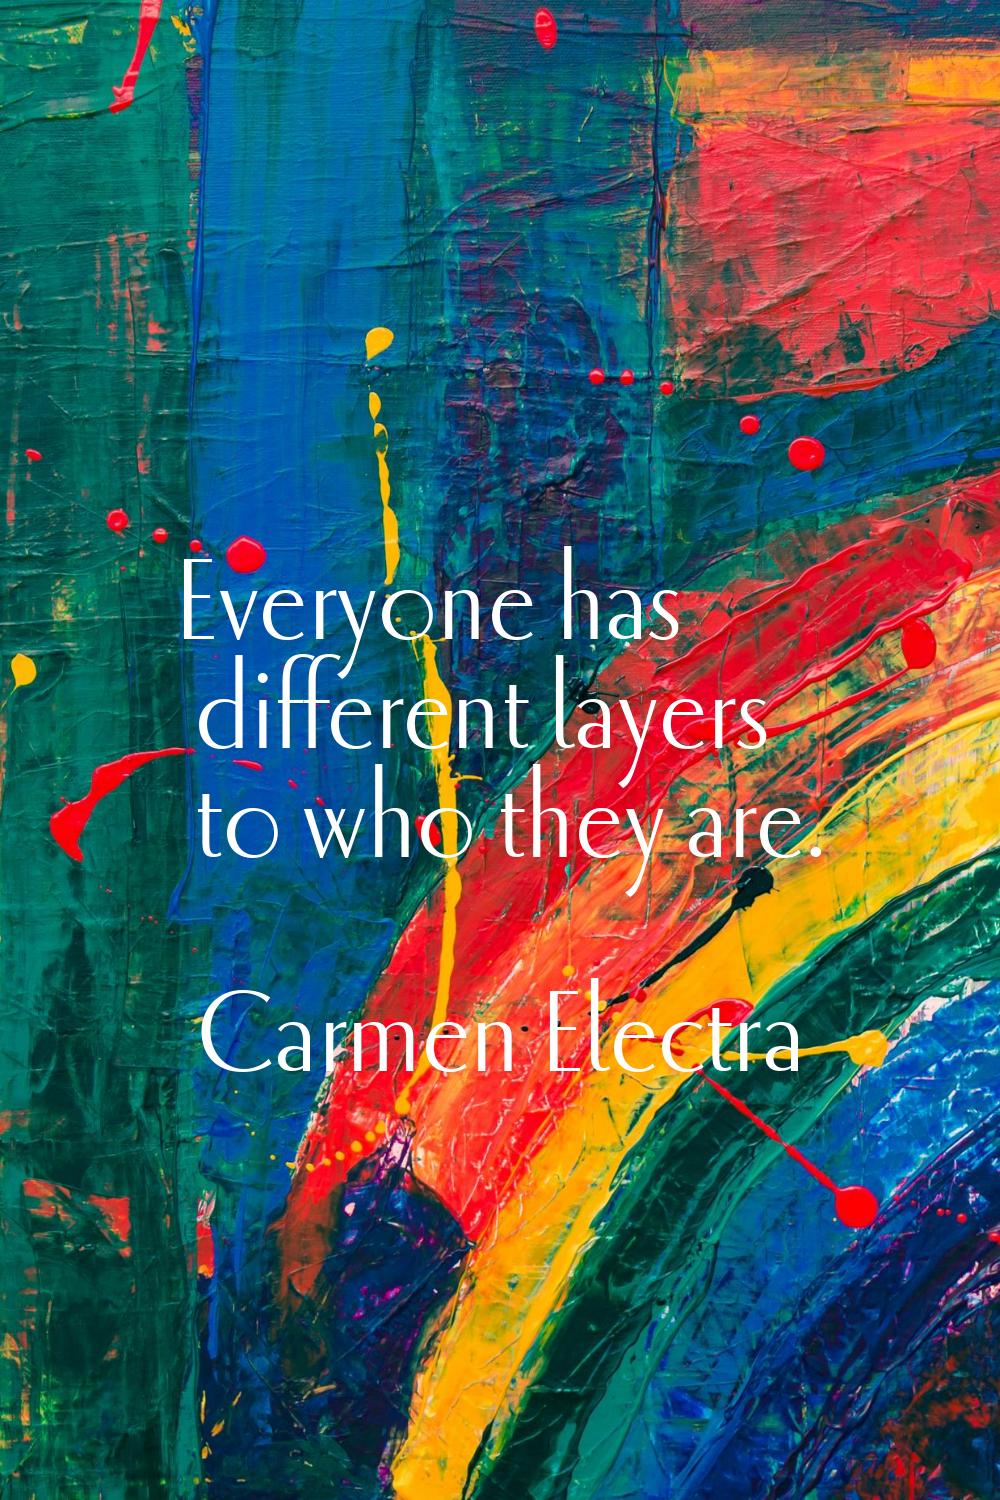 Everyone has different layers to who they are.